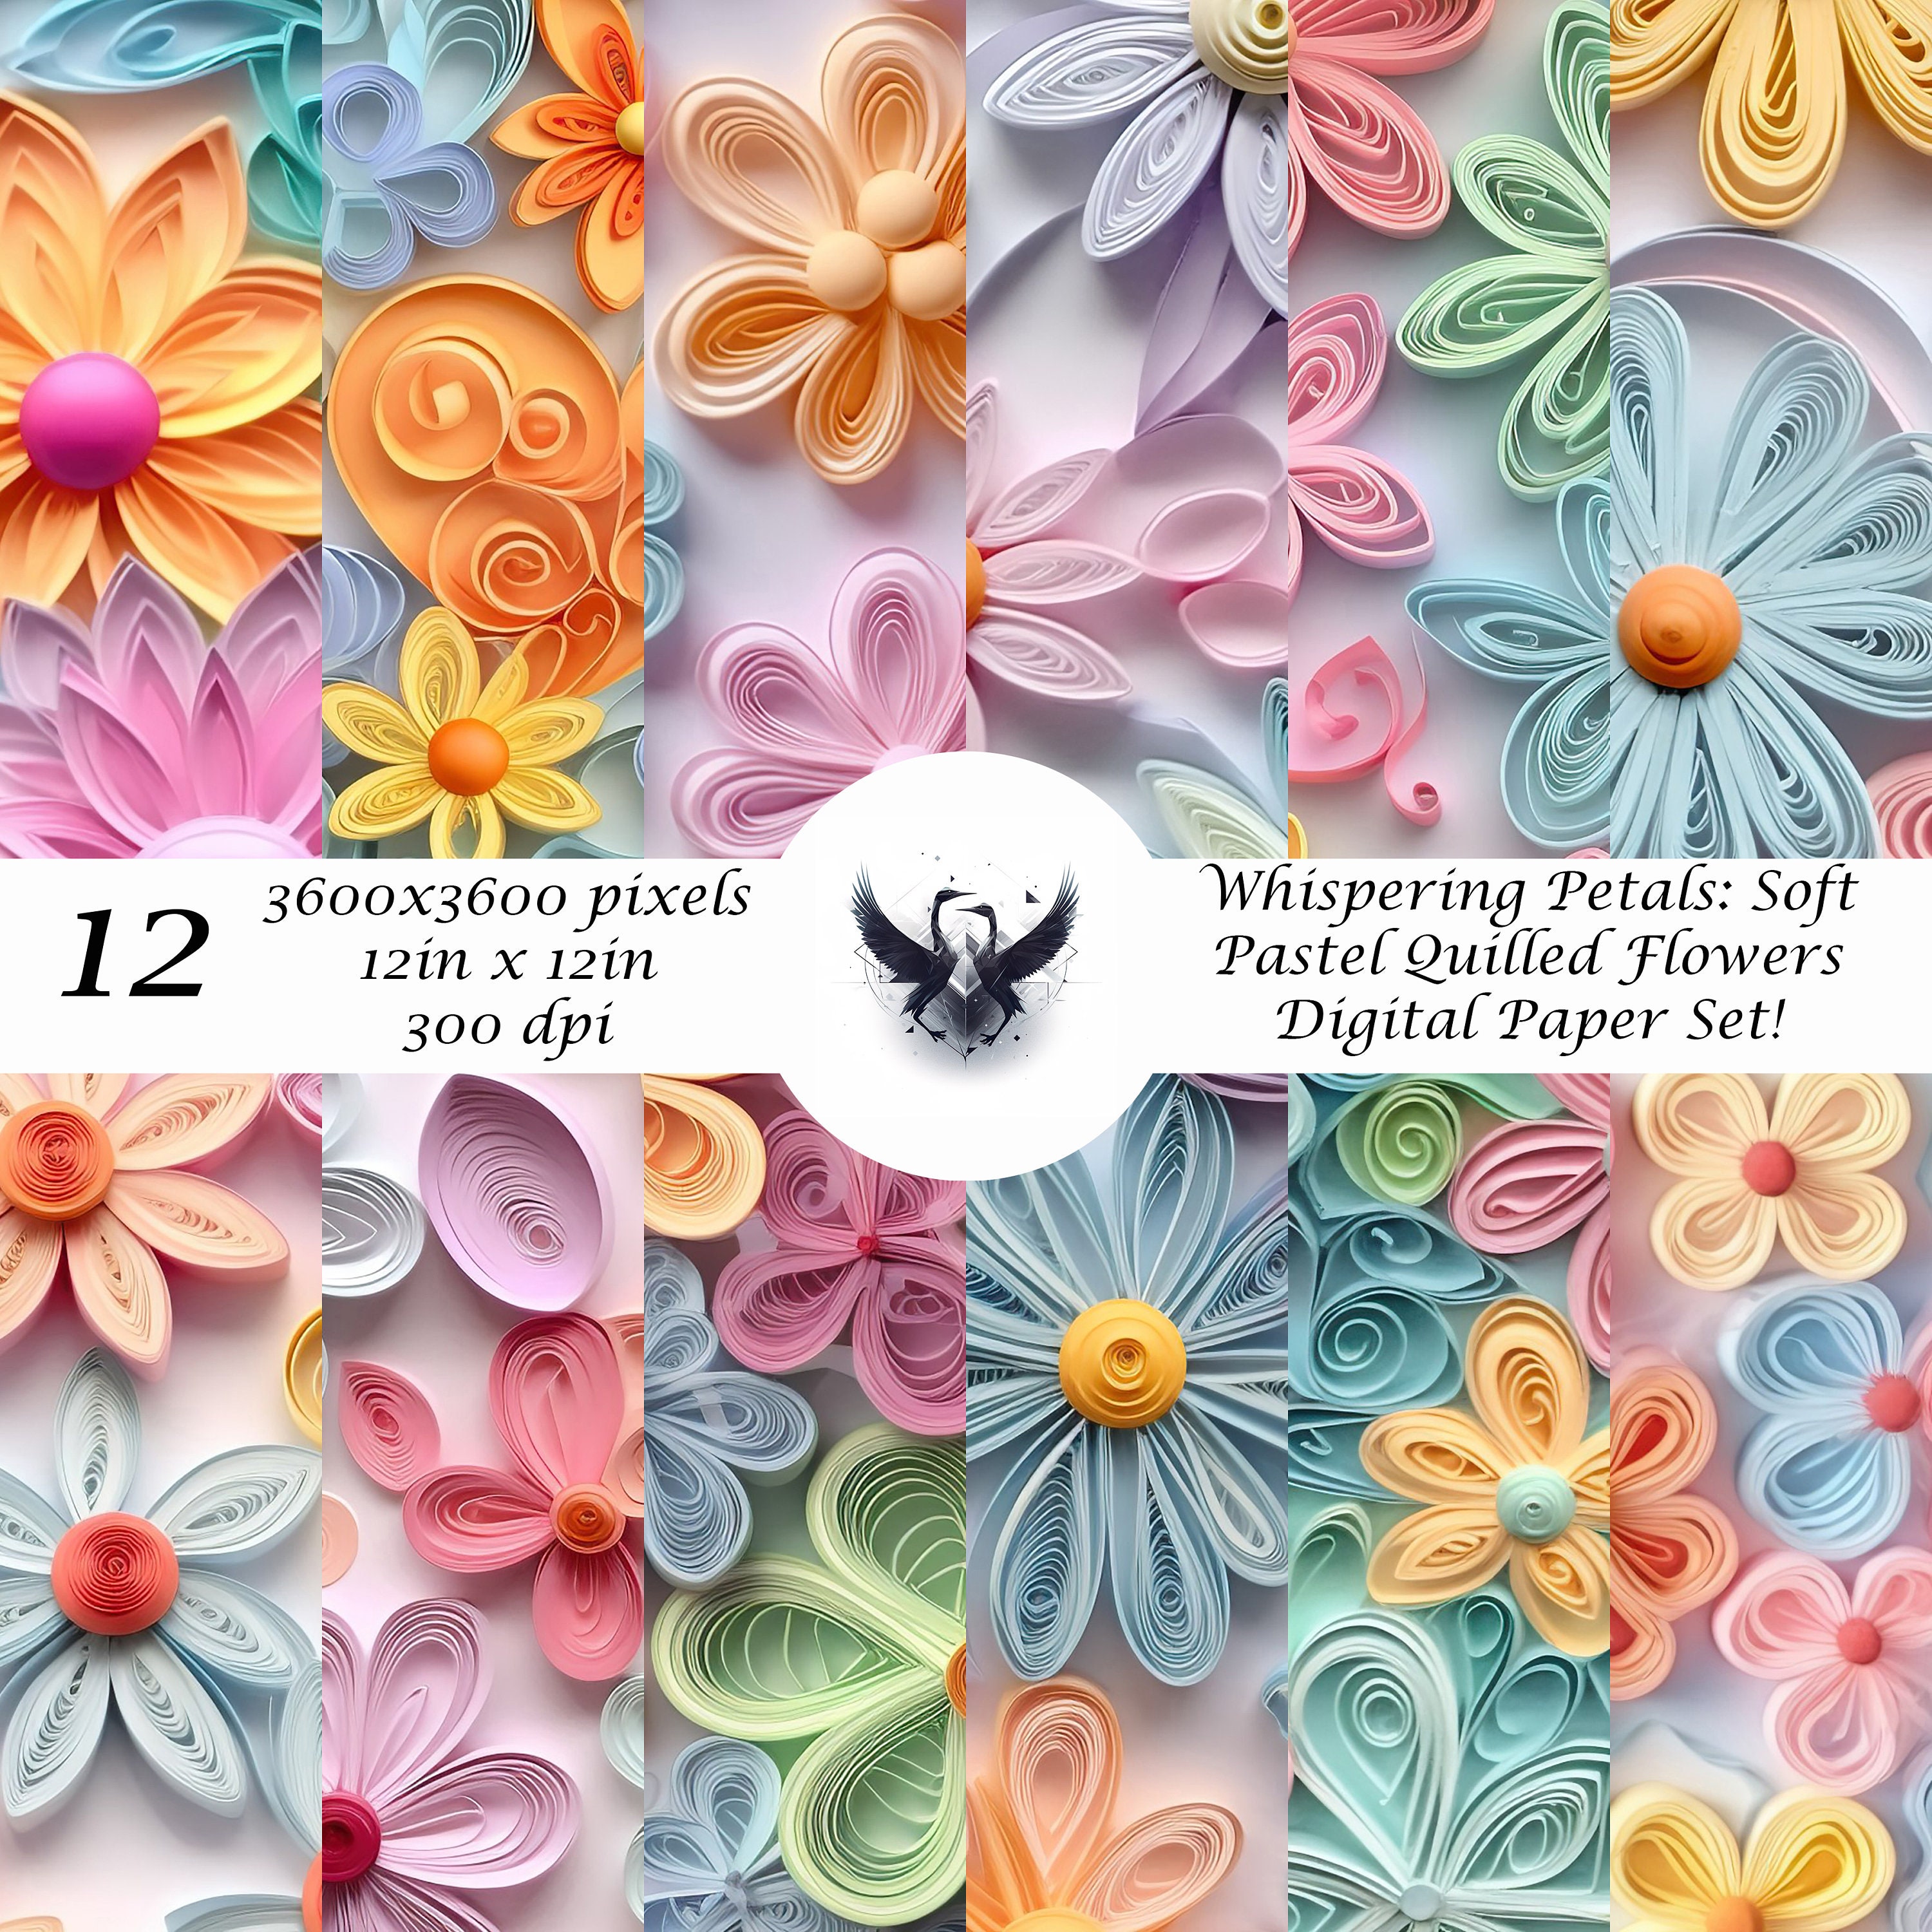 Quilling Butterfly Designs PDF & JPG Files, Beginner Patterns, Easy  Instructions, Paper Art, Paper Craft 